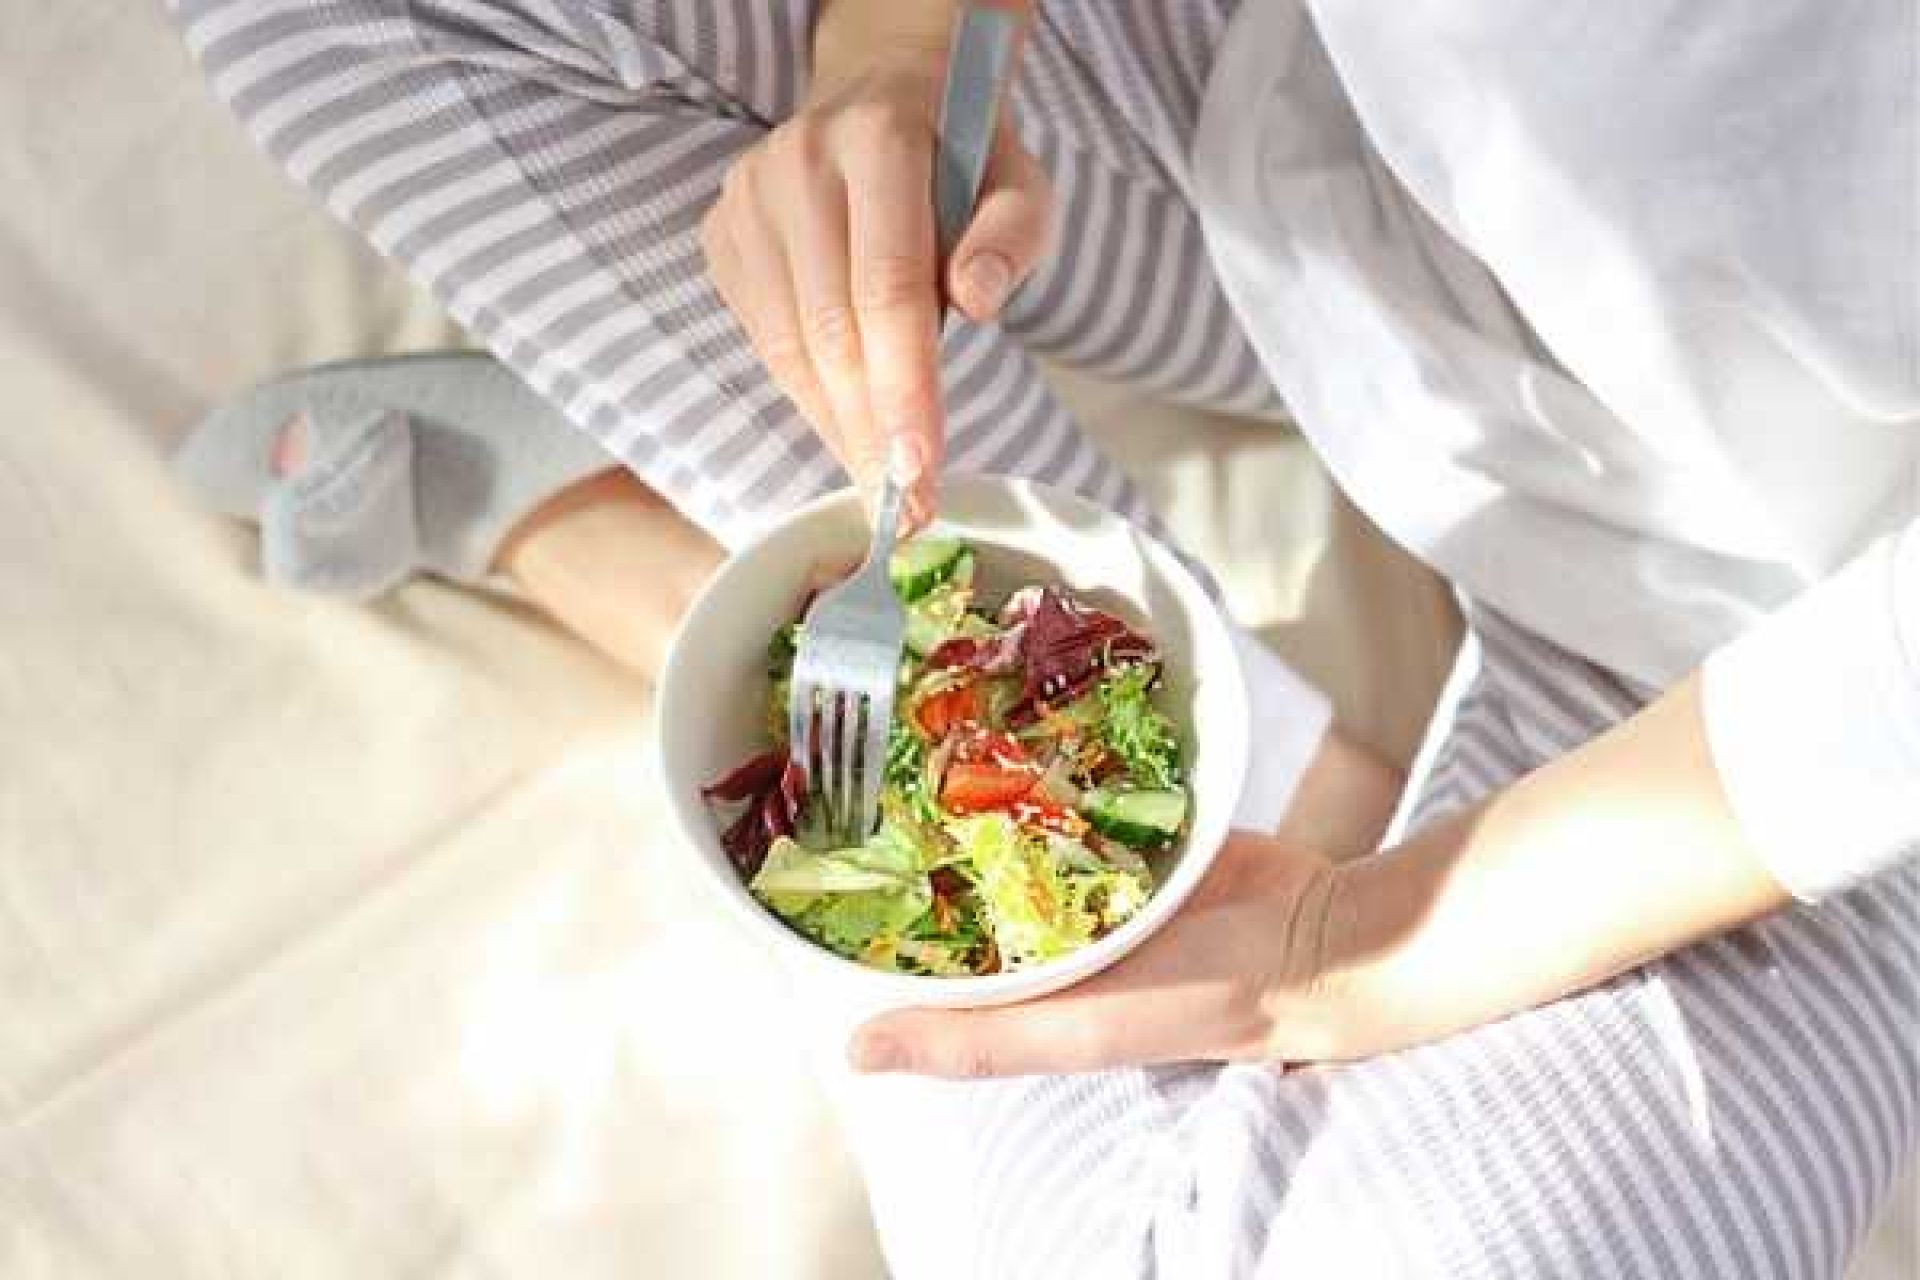 The Fertility Diet: What Should You Eat if You Want to Get Pregnant?